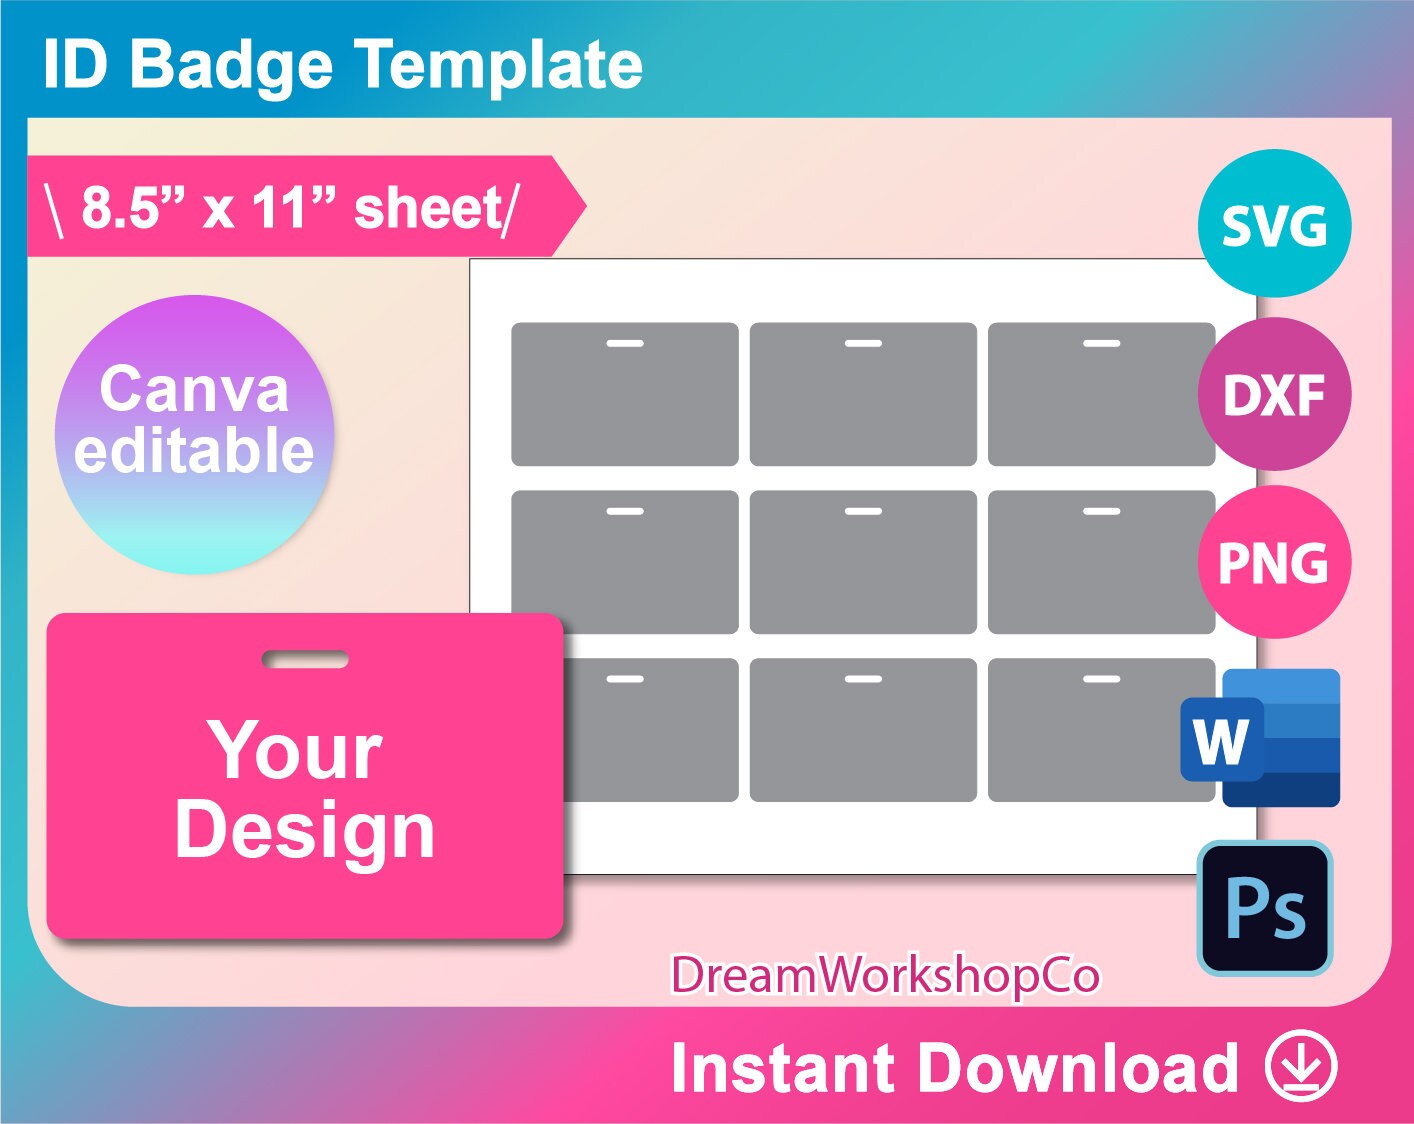 ID Badge Template, Id Badge Blank Template, SVG, Canva, DXF, Ms Word Docx,  Png, Psd, 8.5x11 Sheet, Printable 